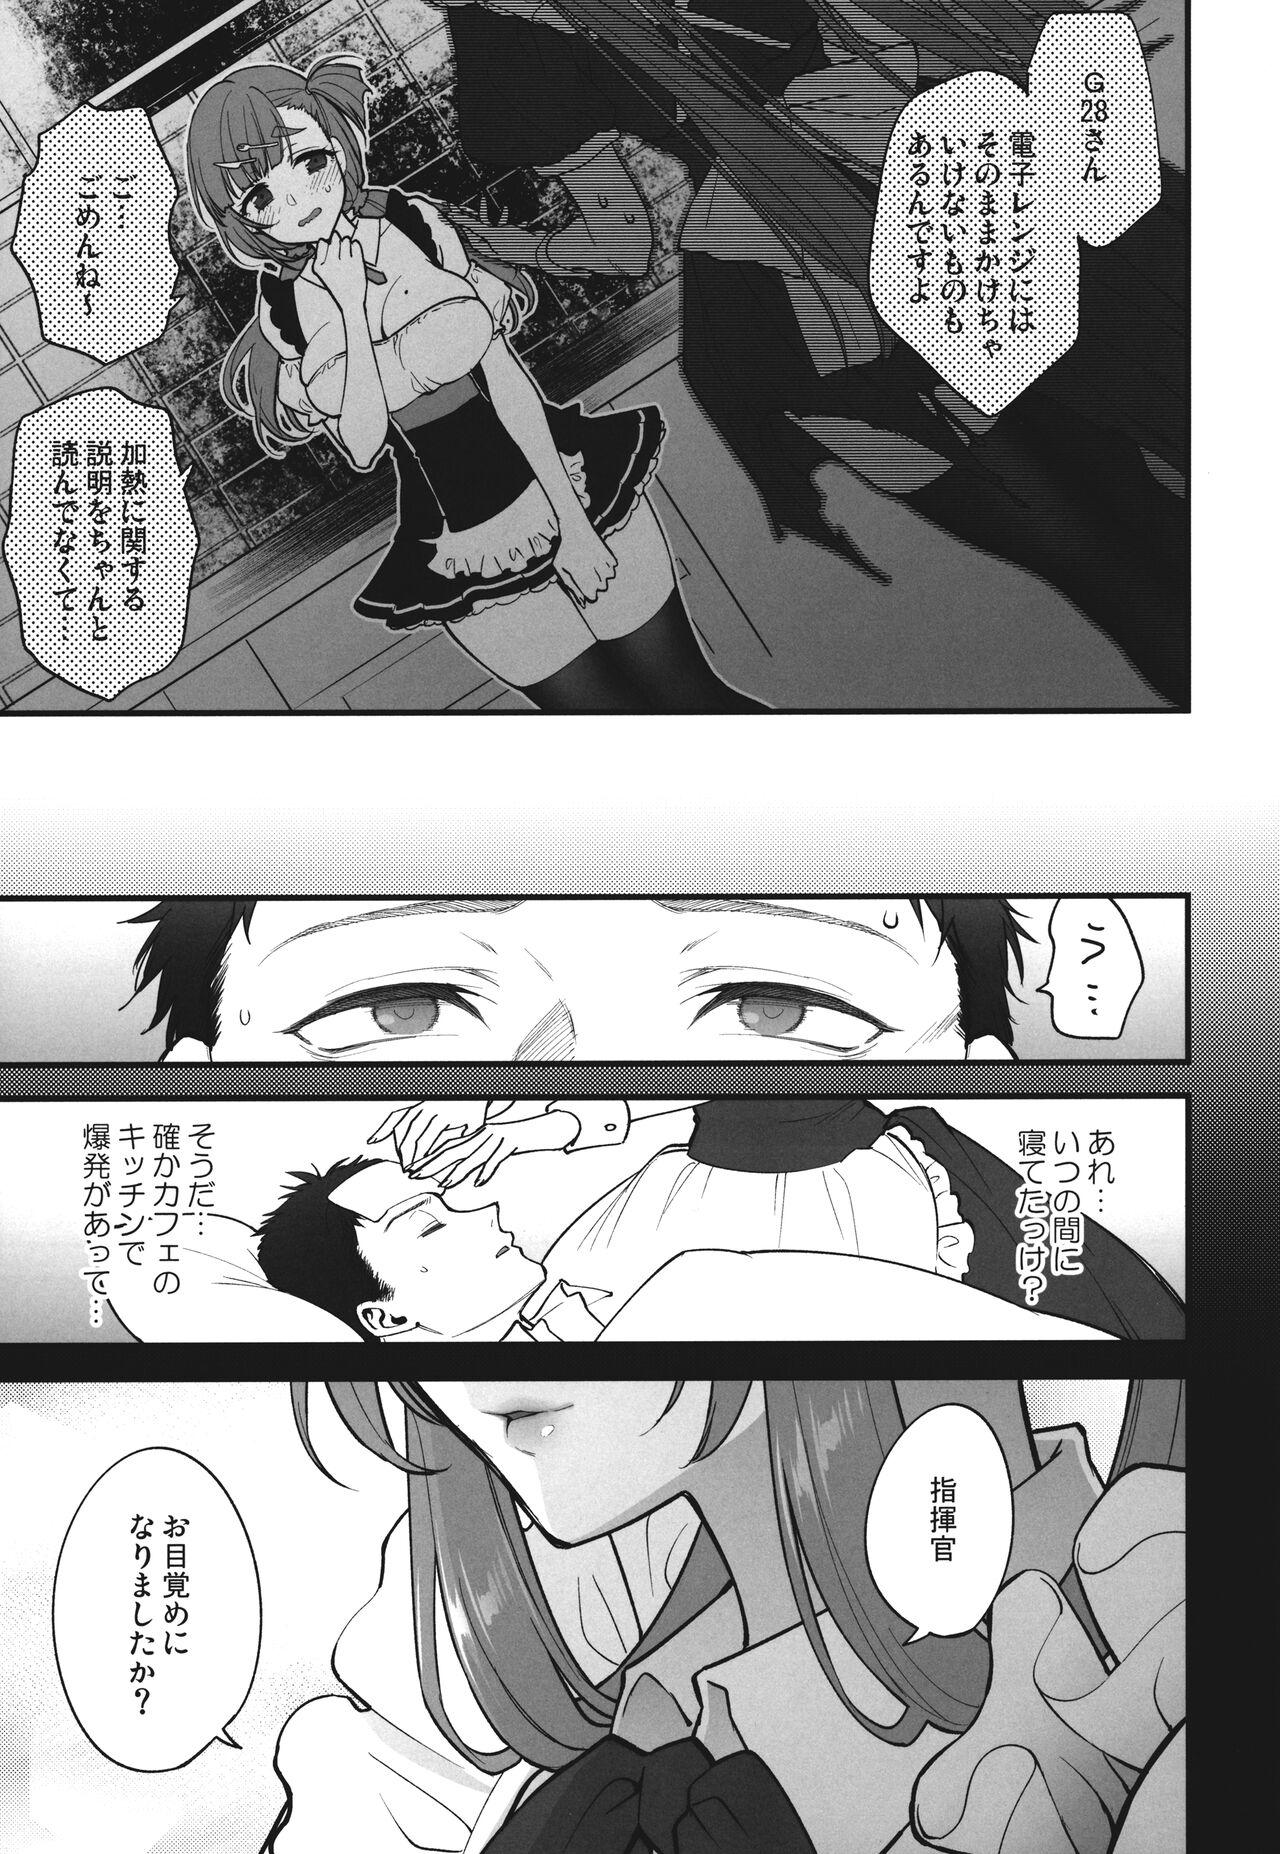 Lady Make me Yours - Girls frontline Hard Cock - Page 6